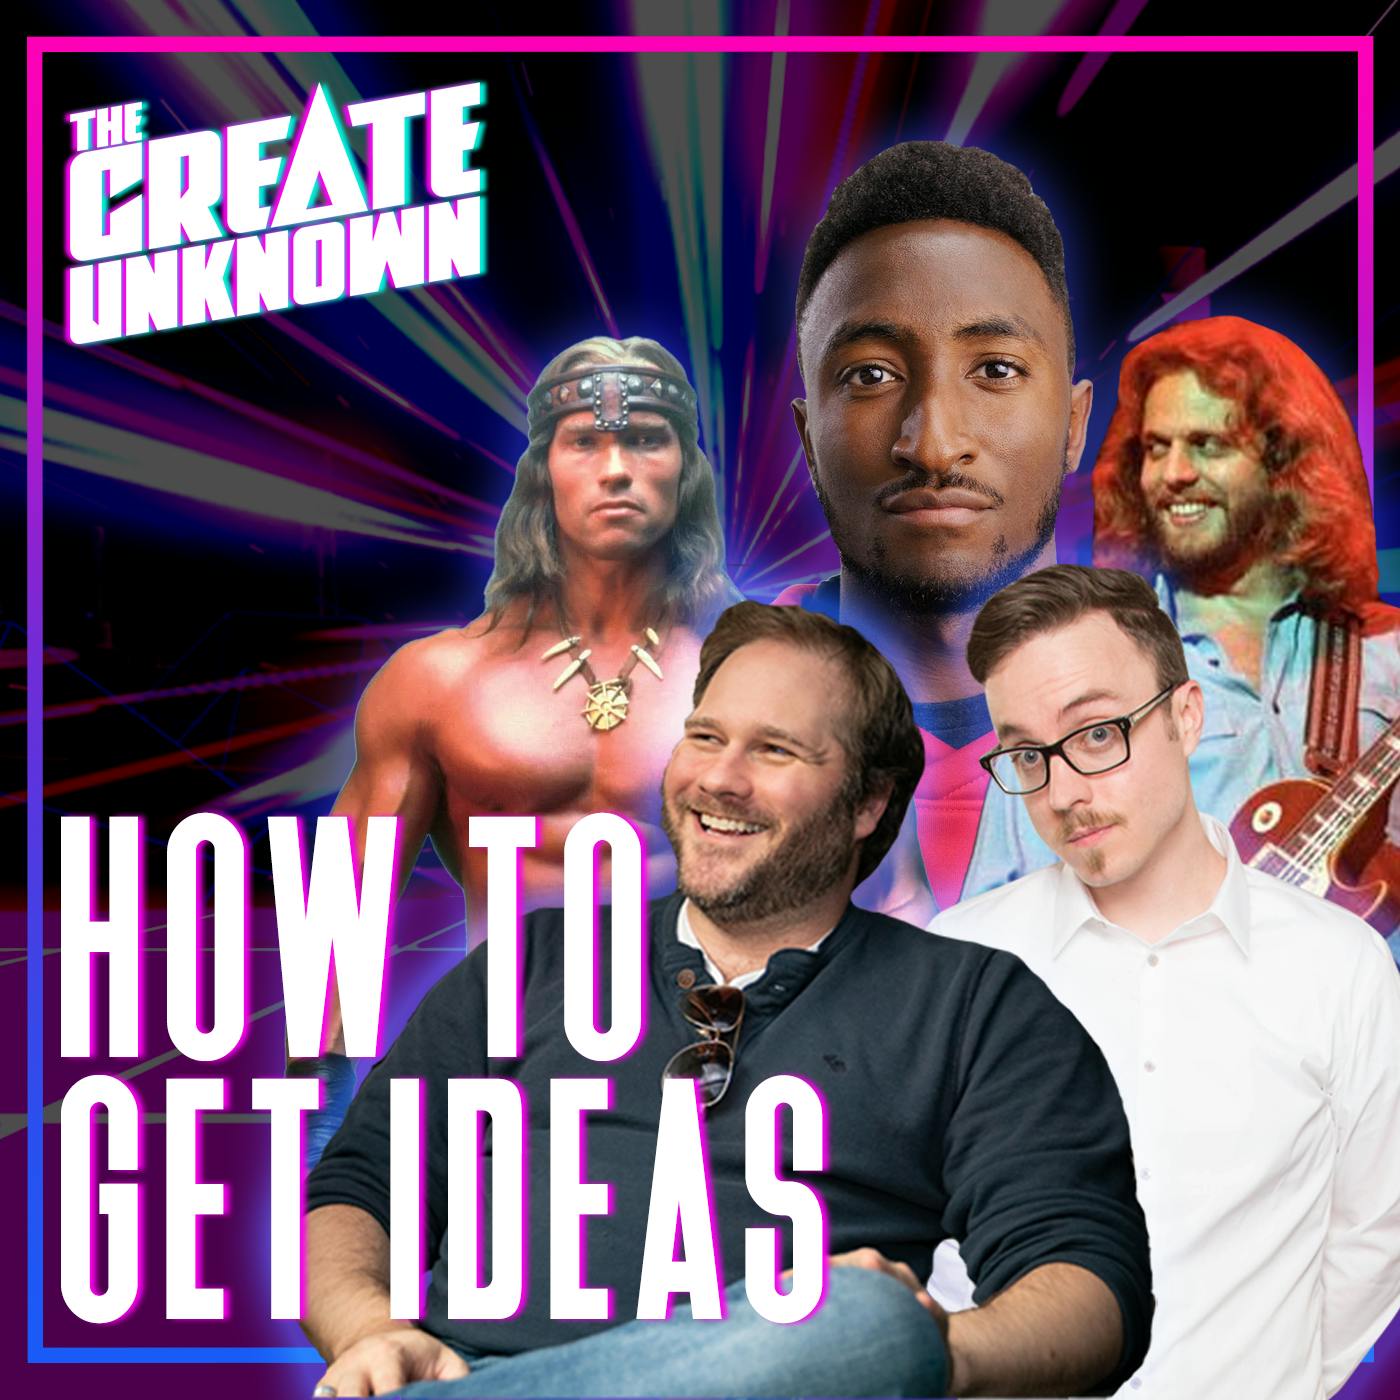 How To Get Ideas